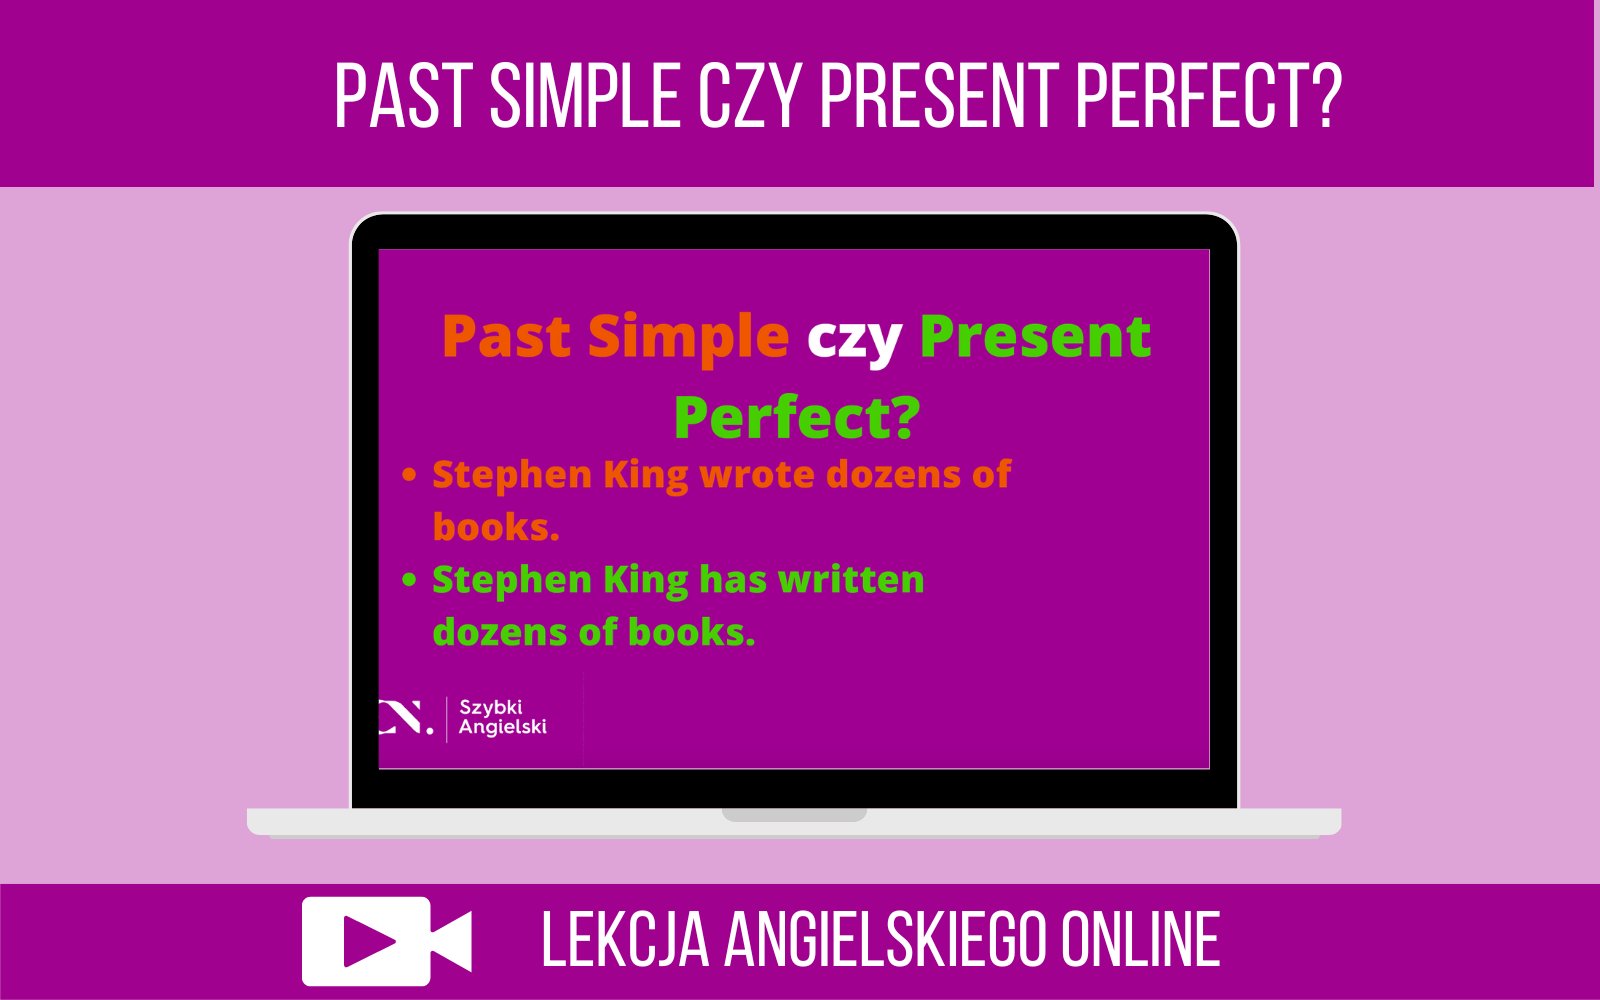 Past Simple czy Present Perfect